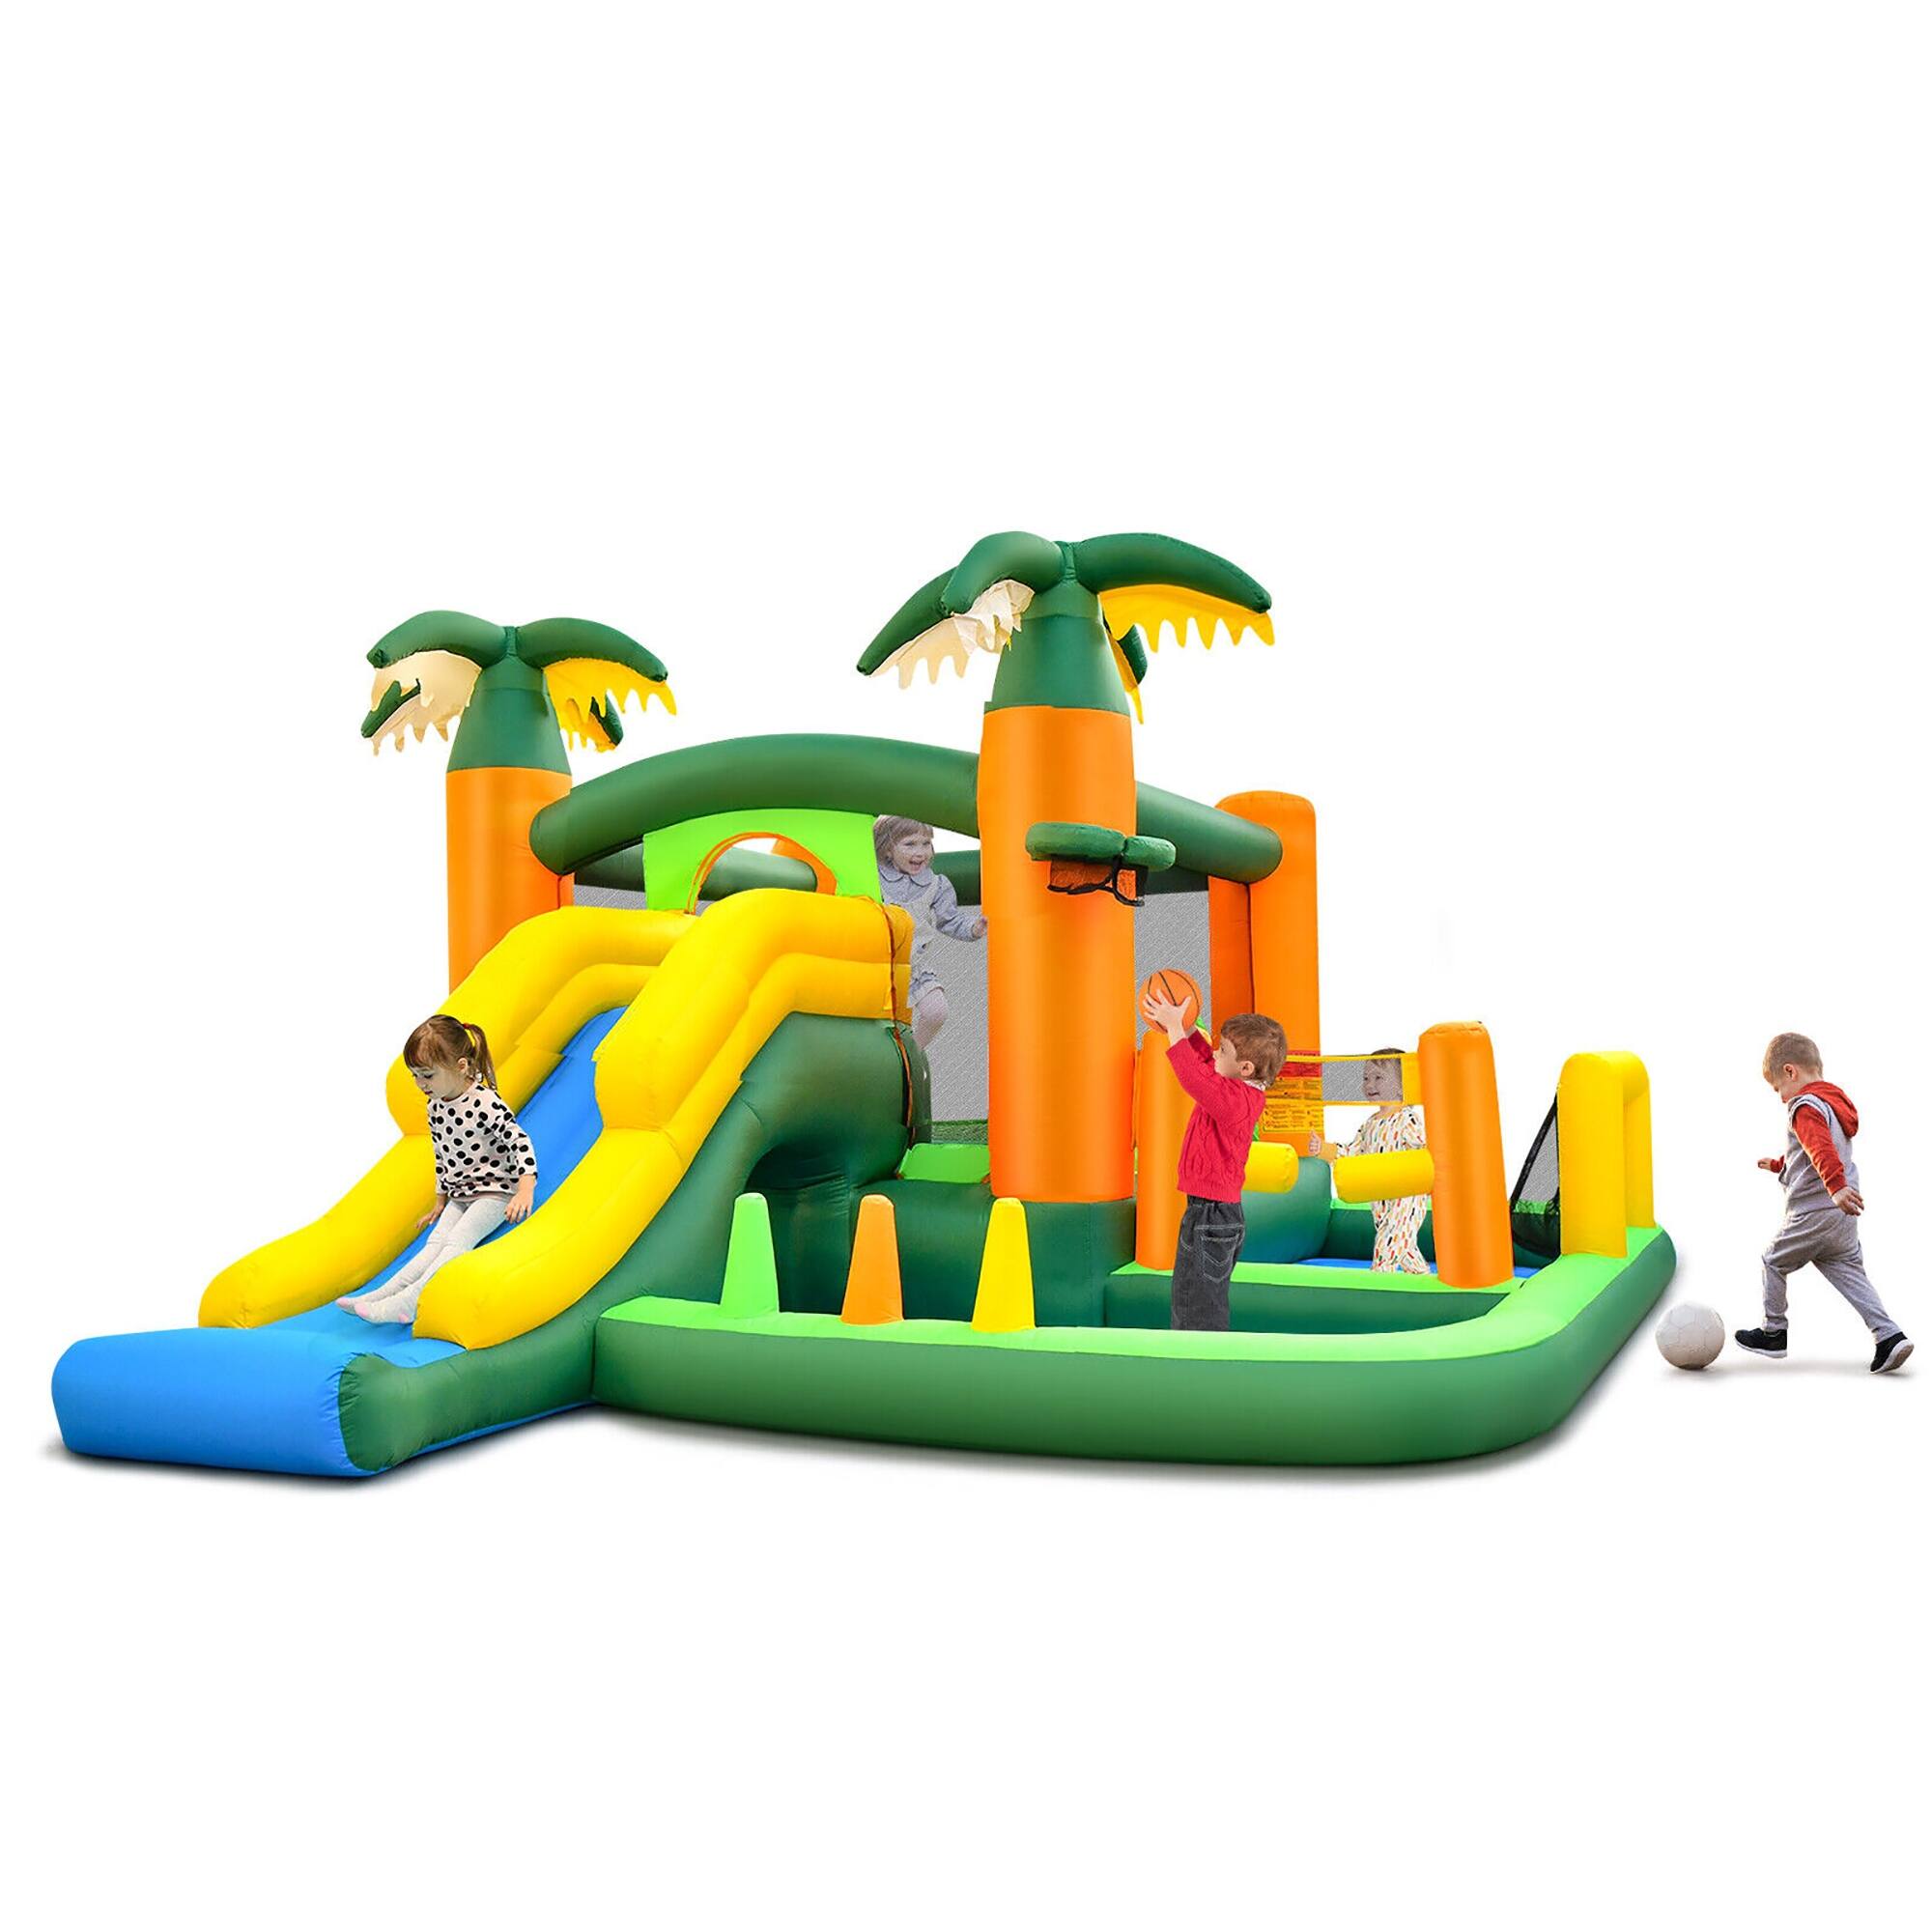 Gymax Tropical Inflatable Bounce Castle, 8-in-1 Giant Jumping House w/